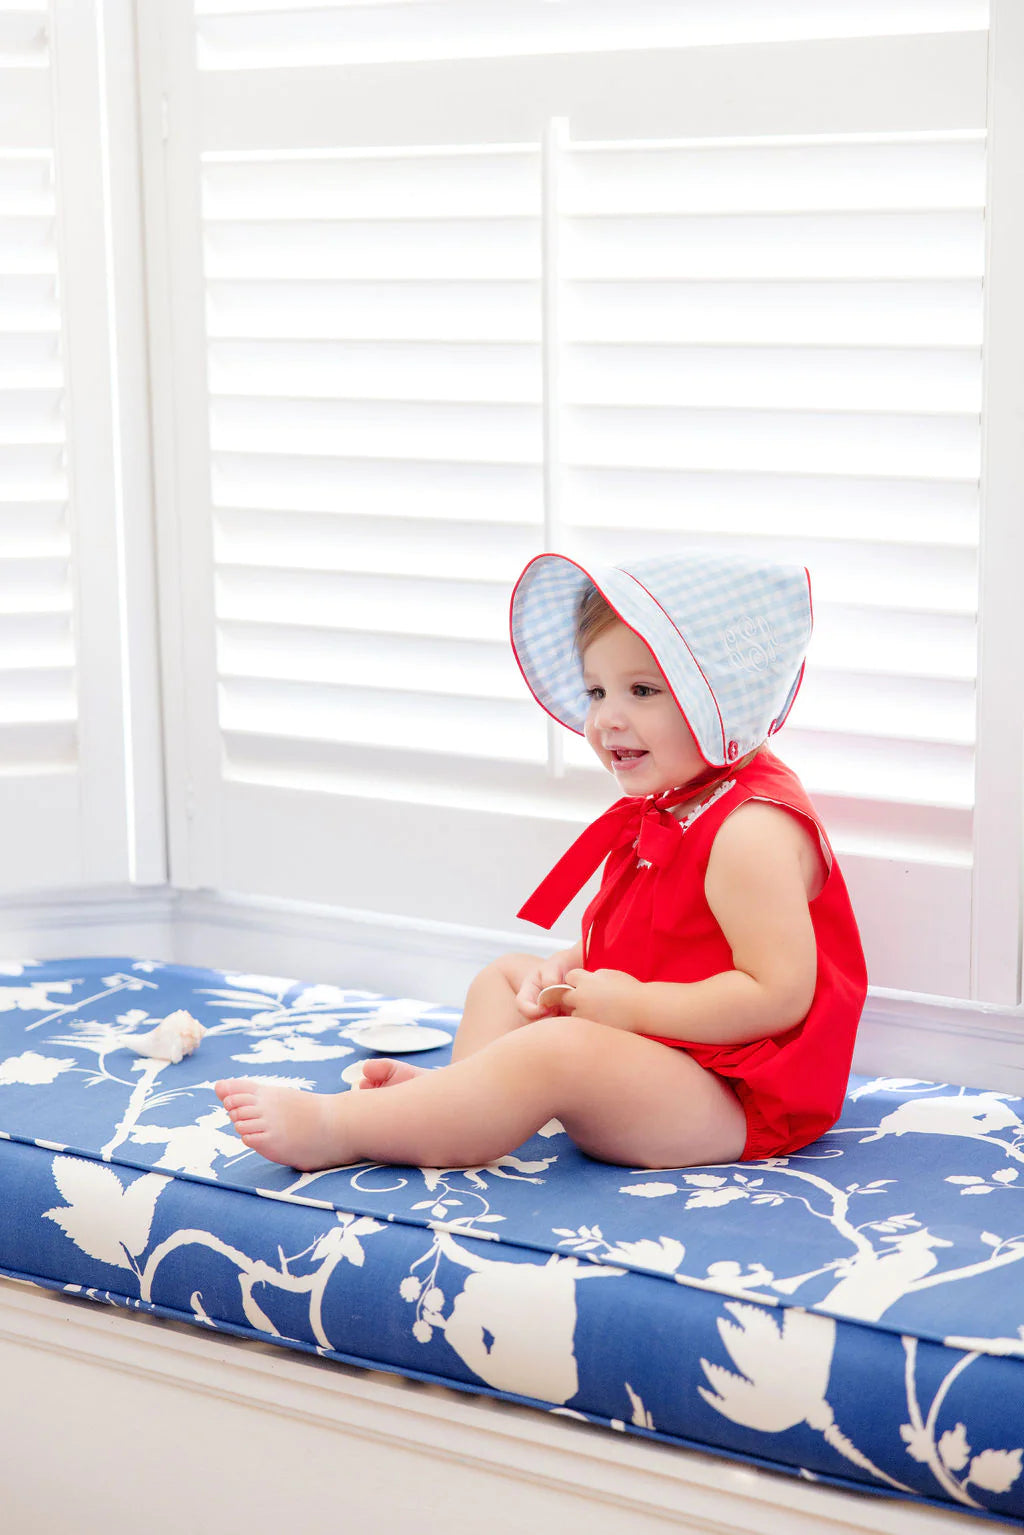 Buckhead Blue Gingham with Richmond Red Catesby Country Club Bonnet